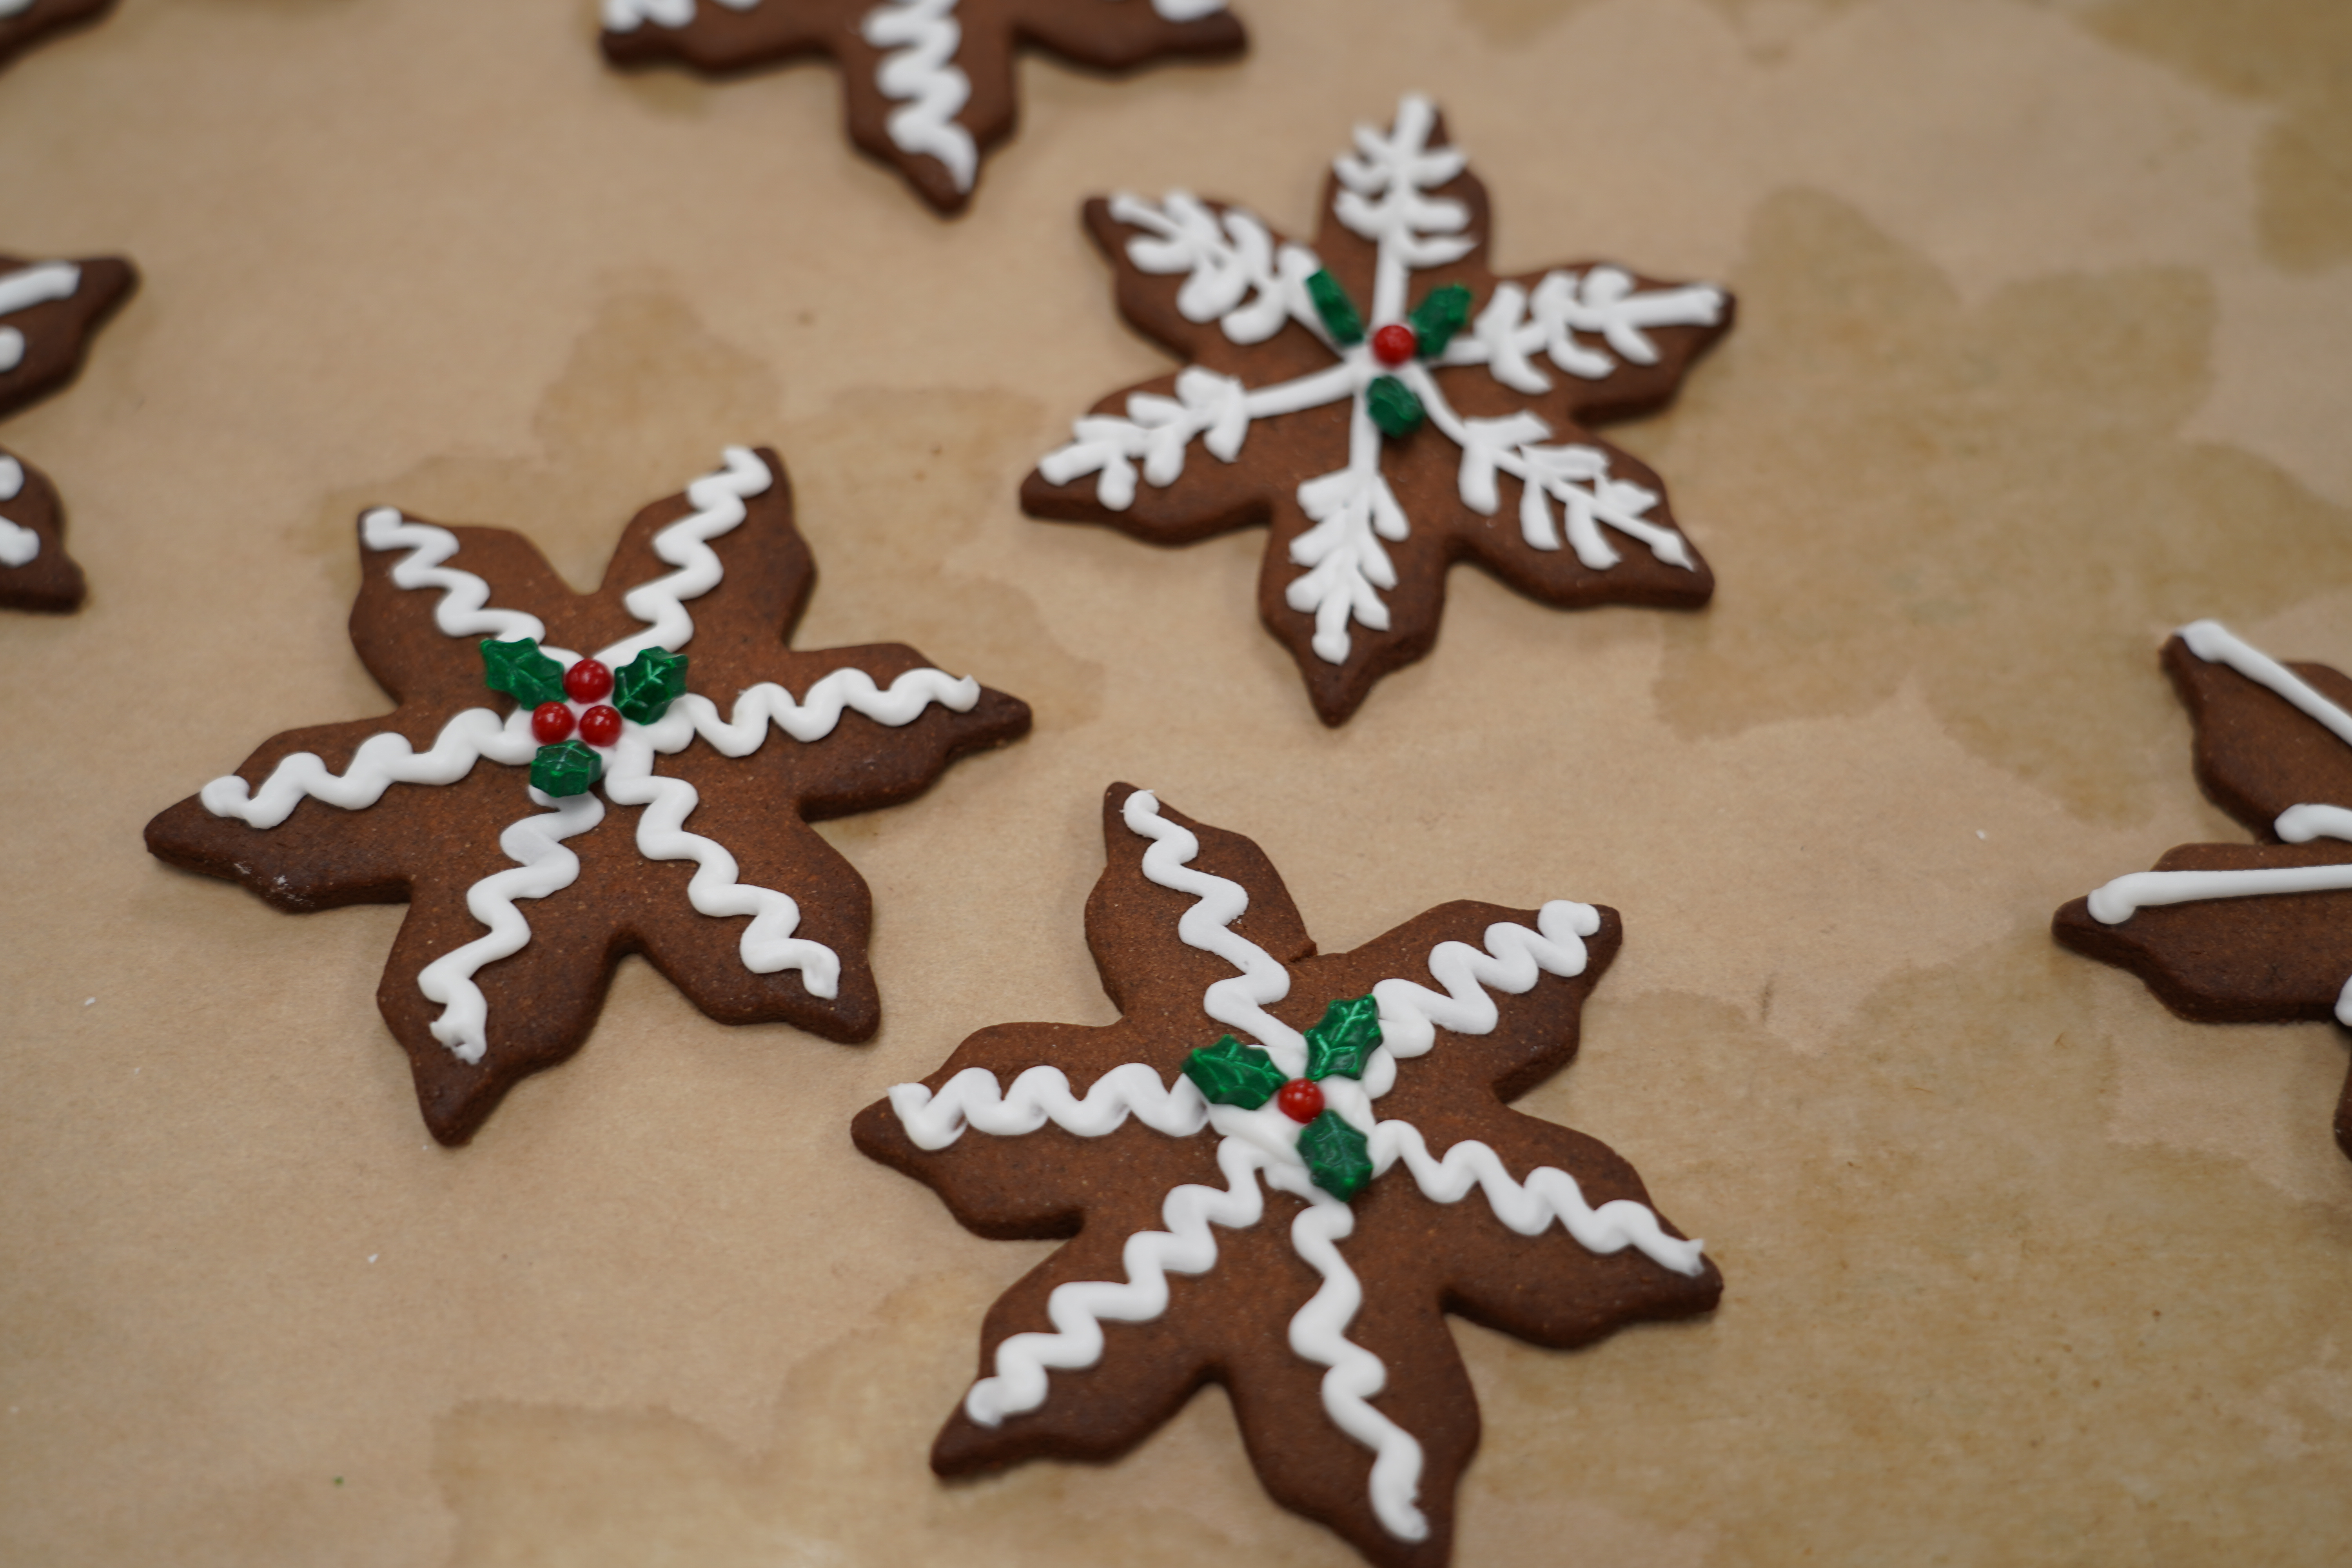 Gingerbread cookies shaped like snowflakes sit on a parchment paper sheet